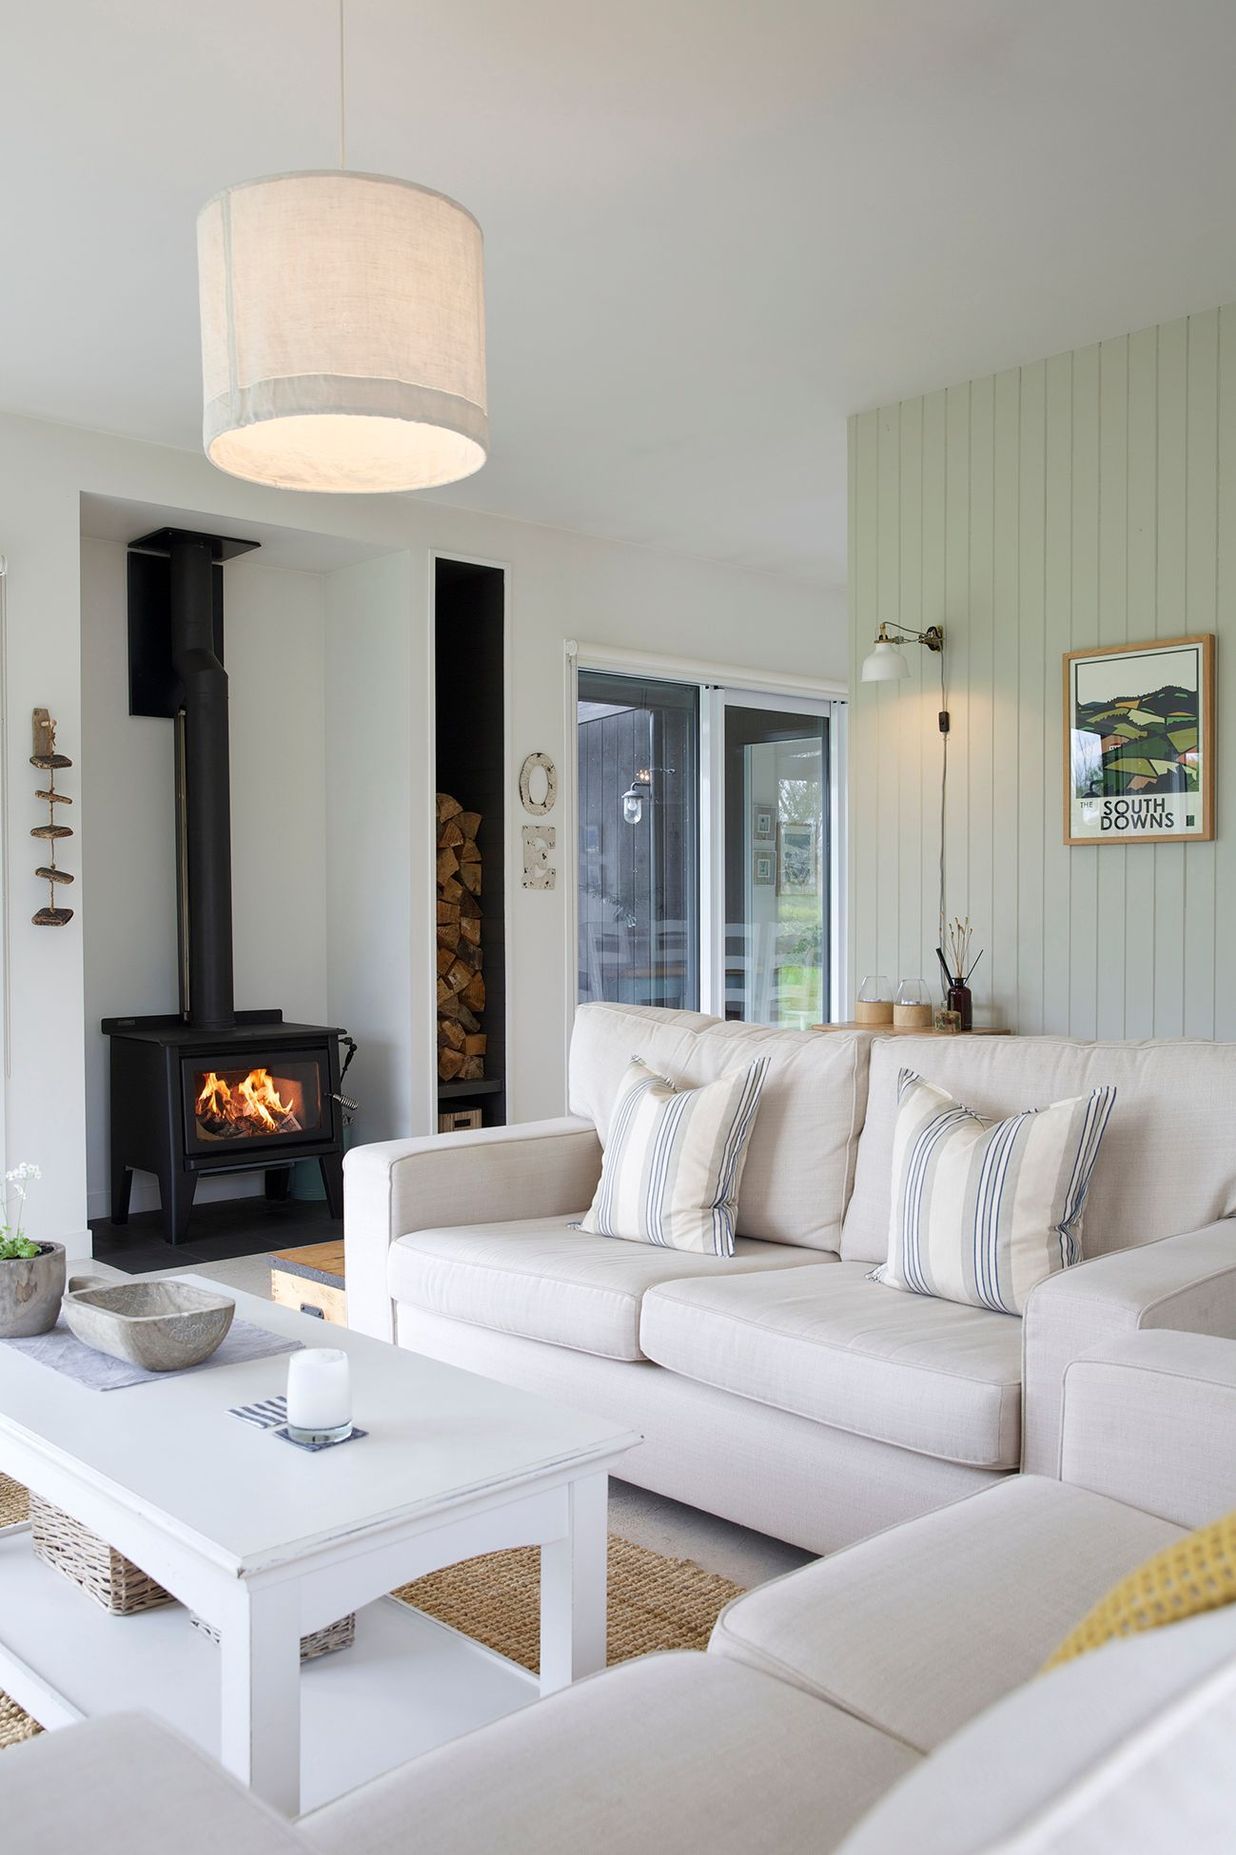 The cosy lounge area features a wood-burning fire and timber-panelled walls.